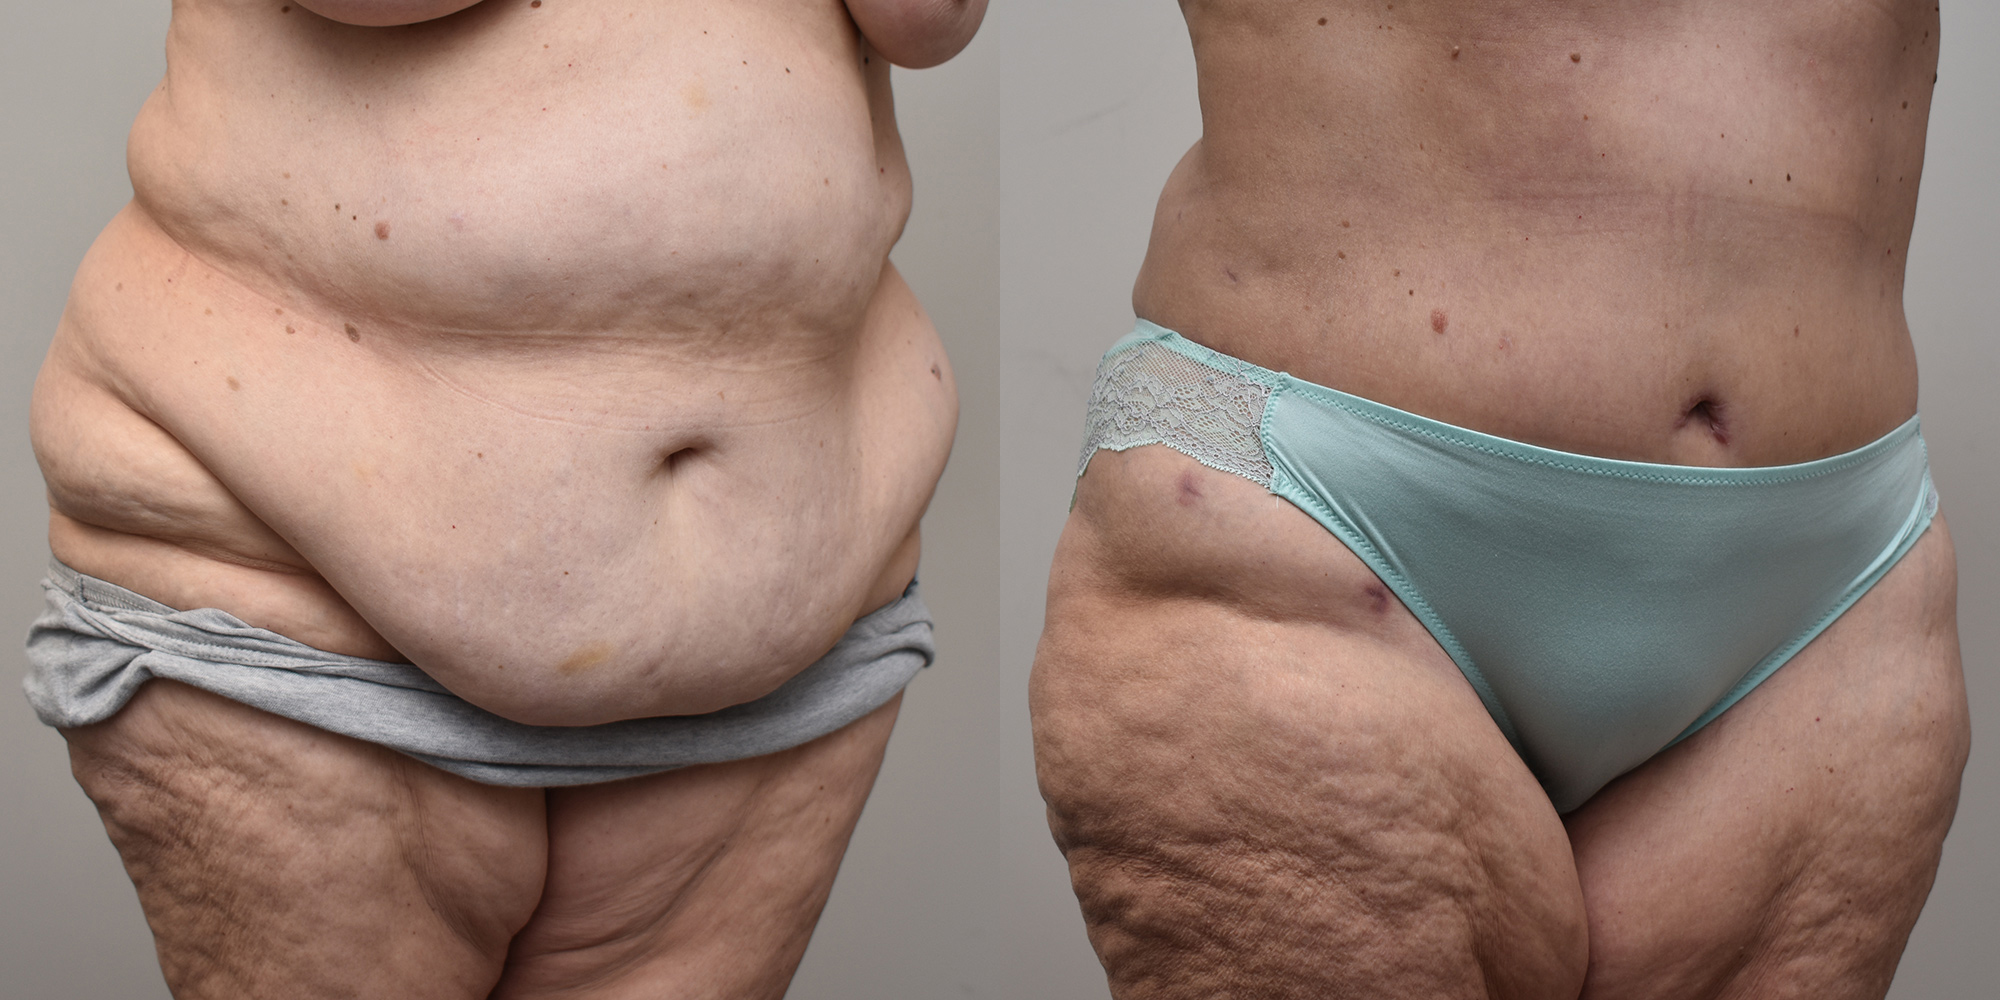 Liposuction Before and After photo by Susan Gannon, MD of The Plastic Surgery Group in Albany, NY